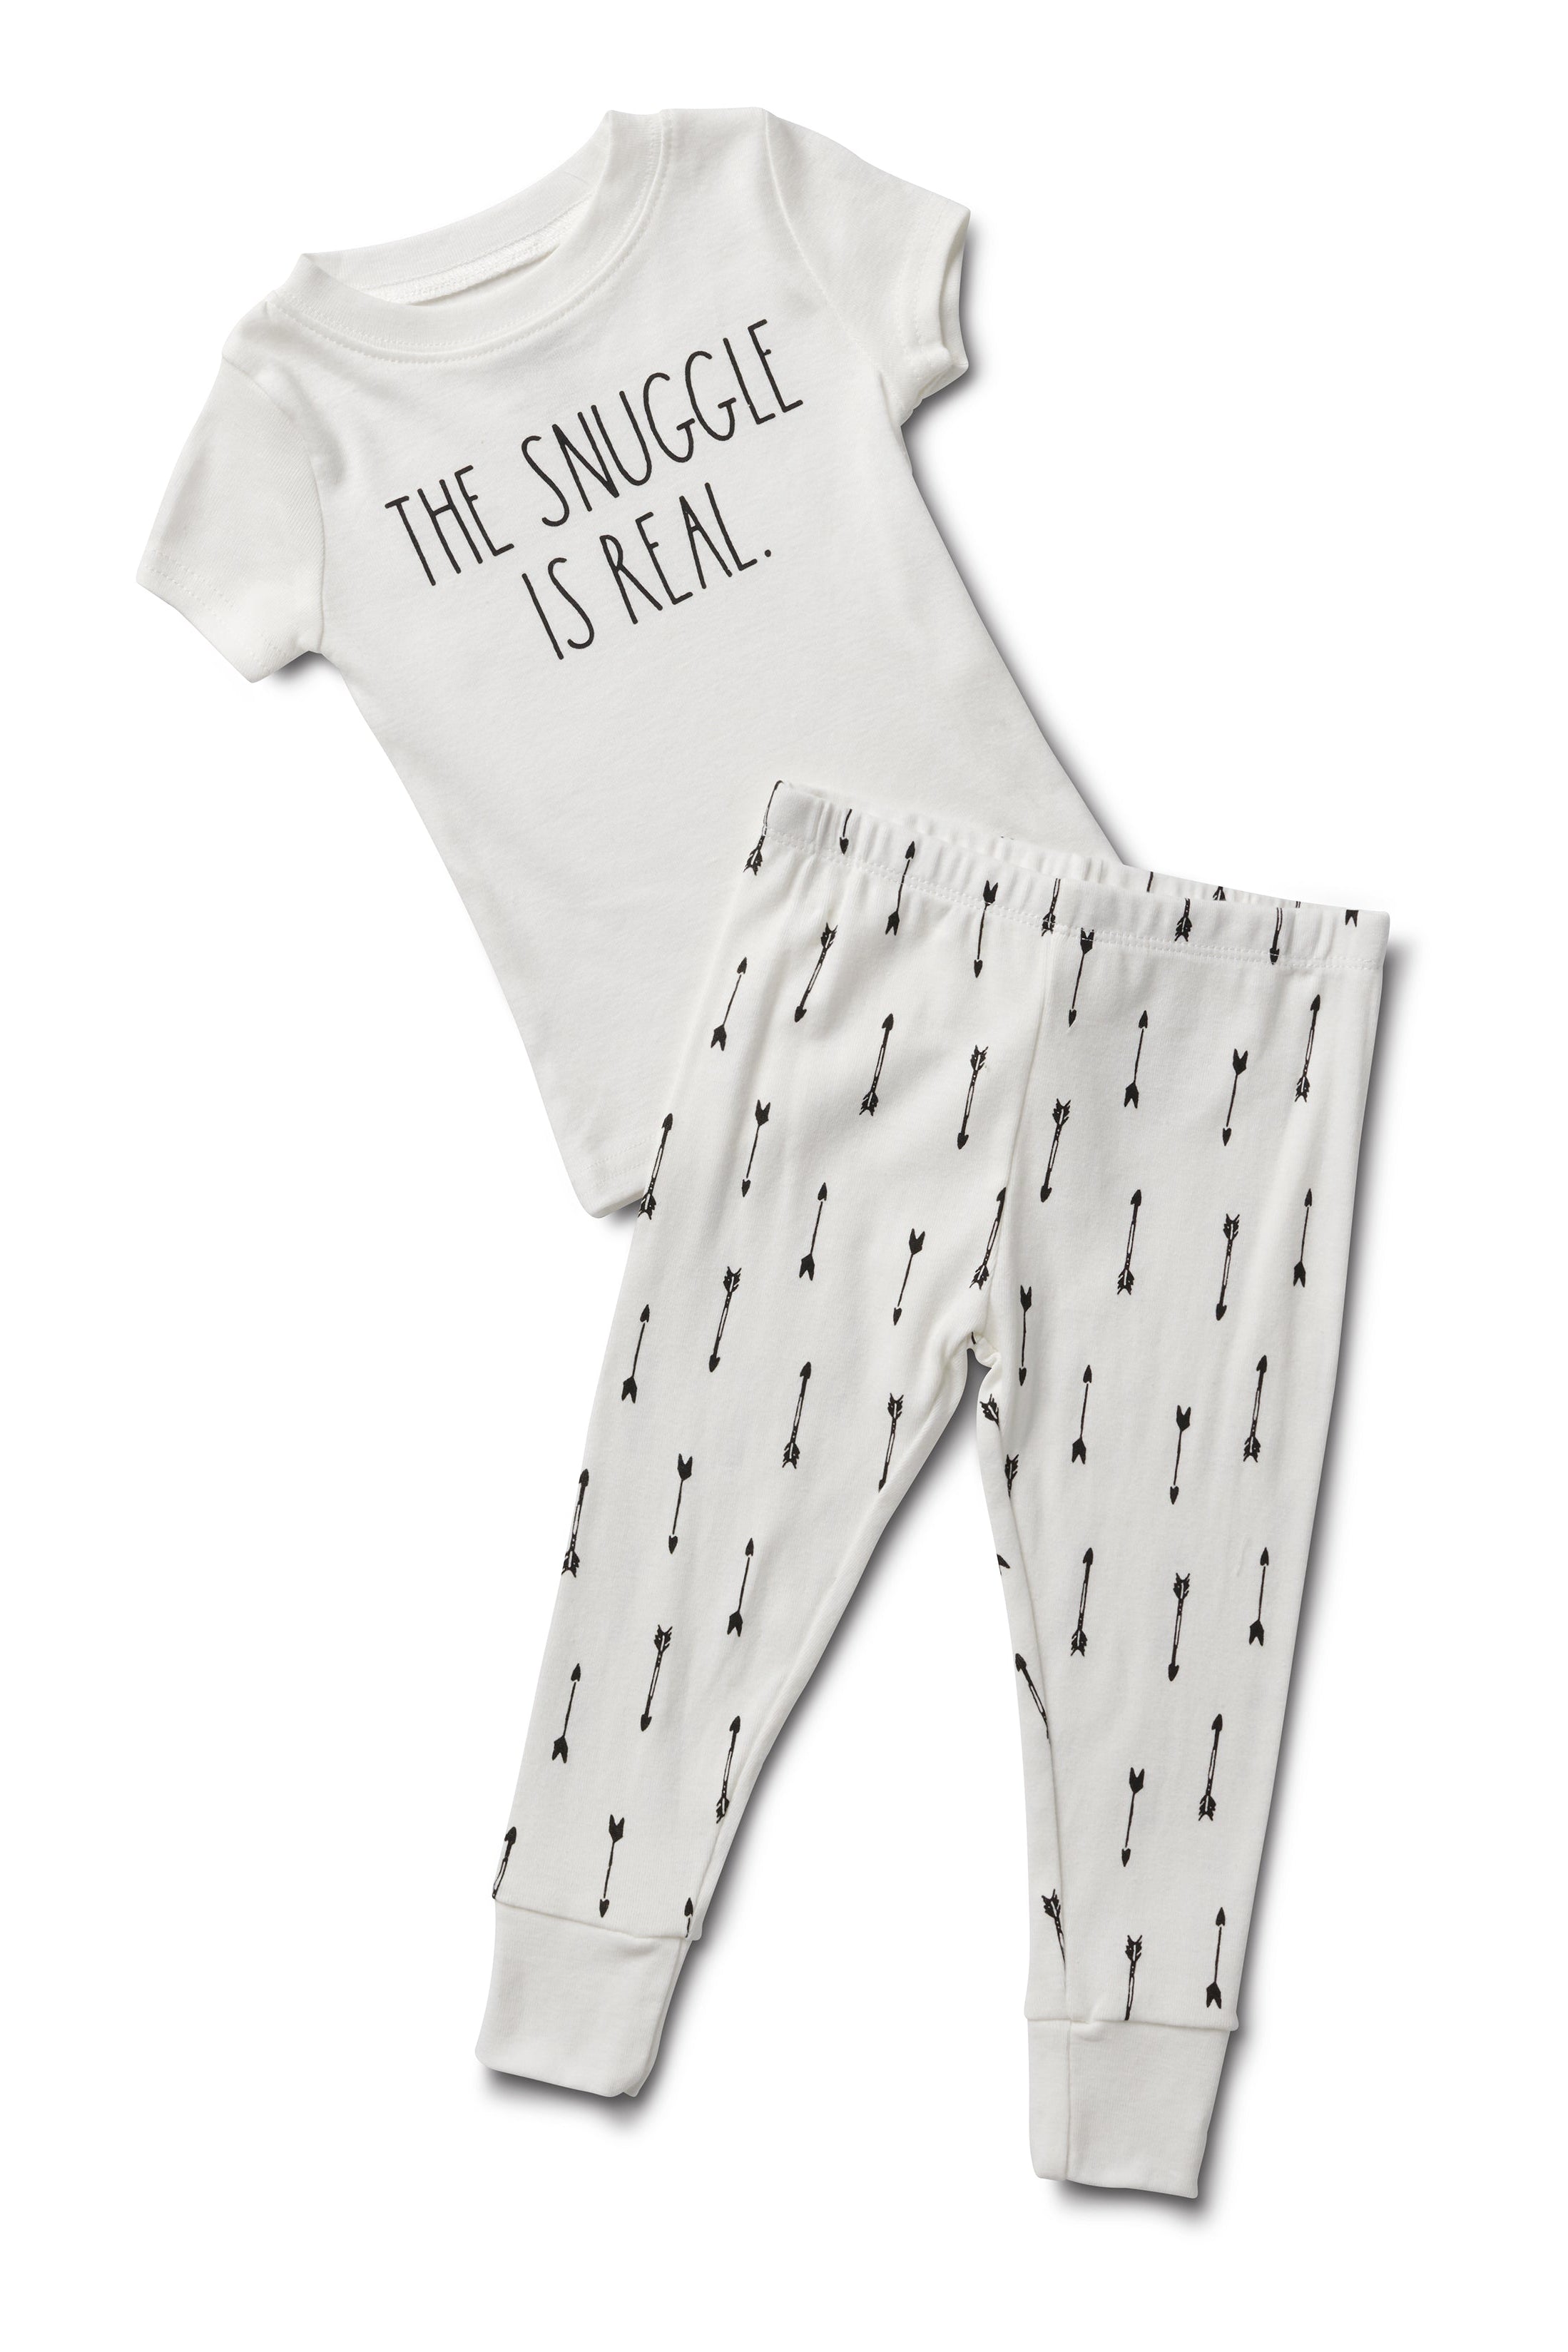 Boy's "THE SNUGGLE IS REAL" Short Sleeve Tee and Joggers Pajama Set - Rae Dunn Wear